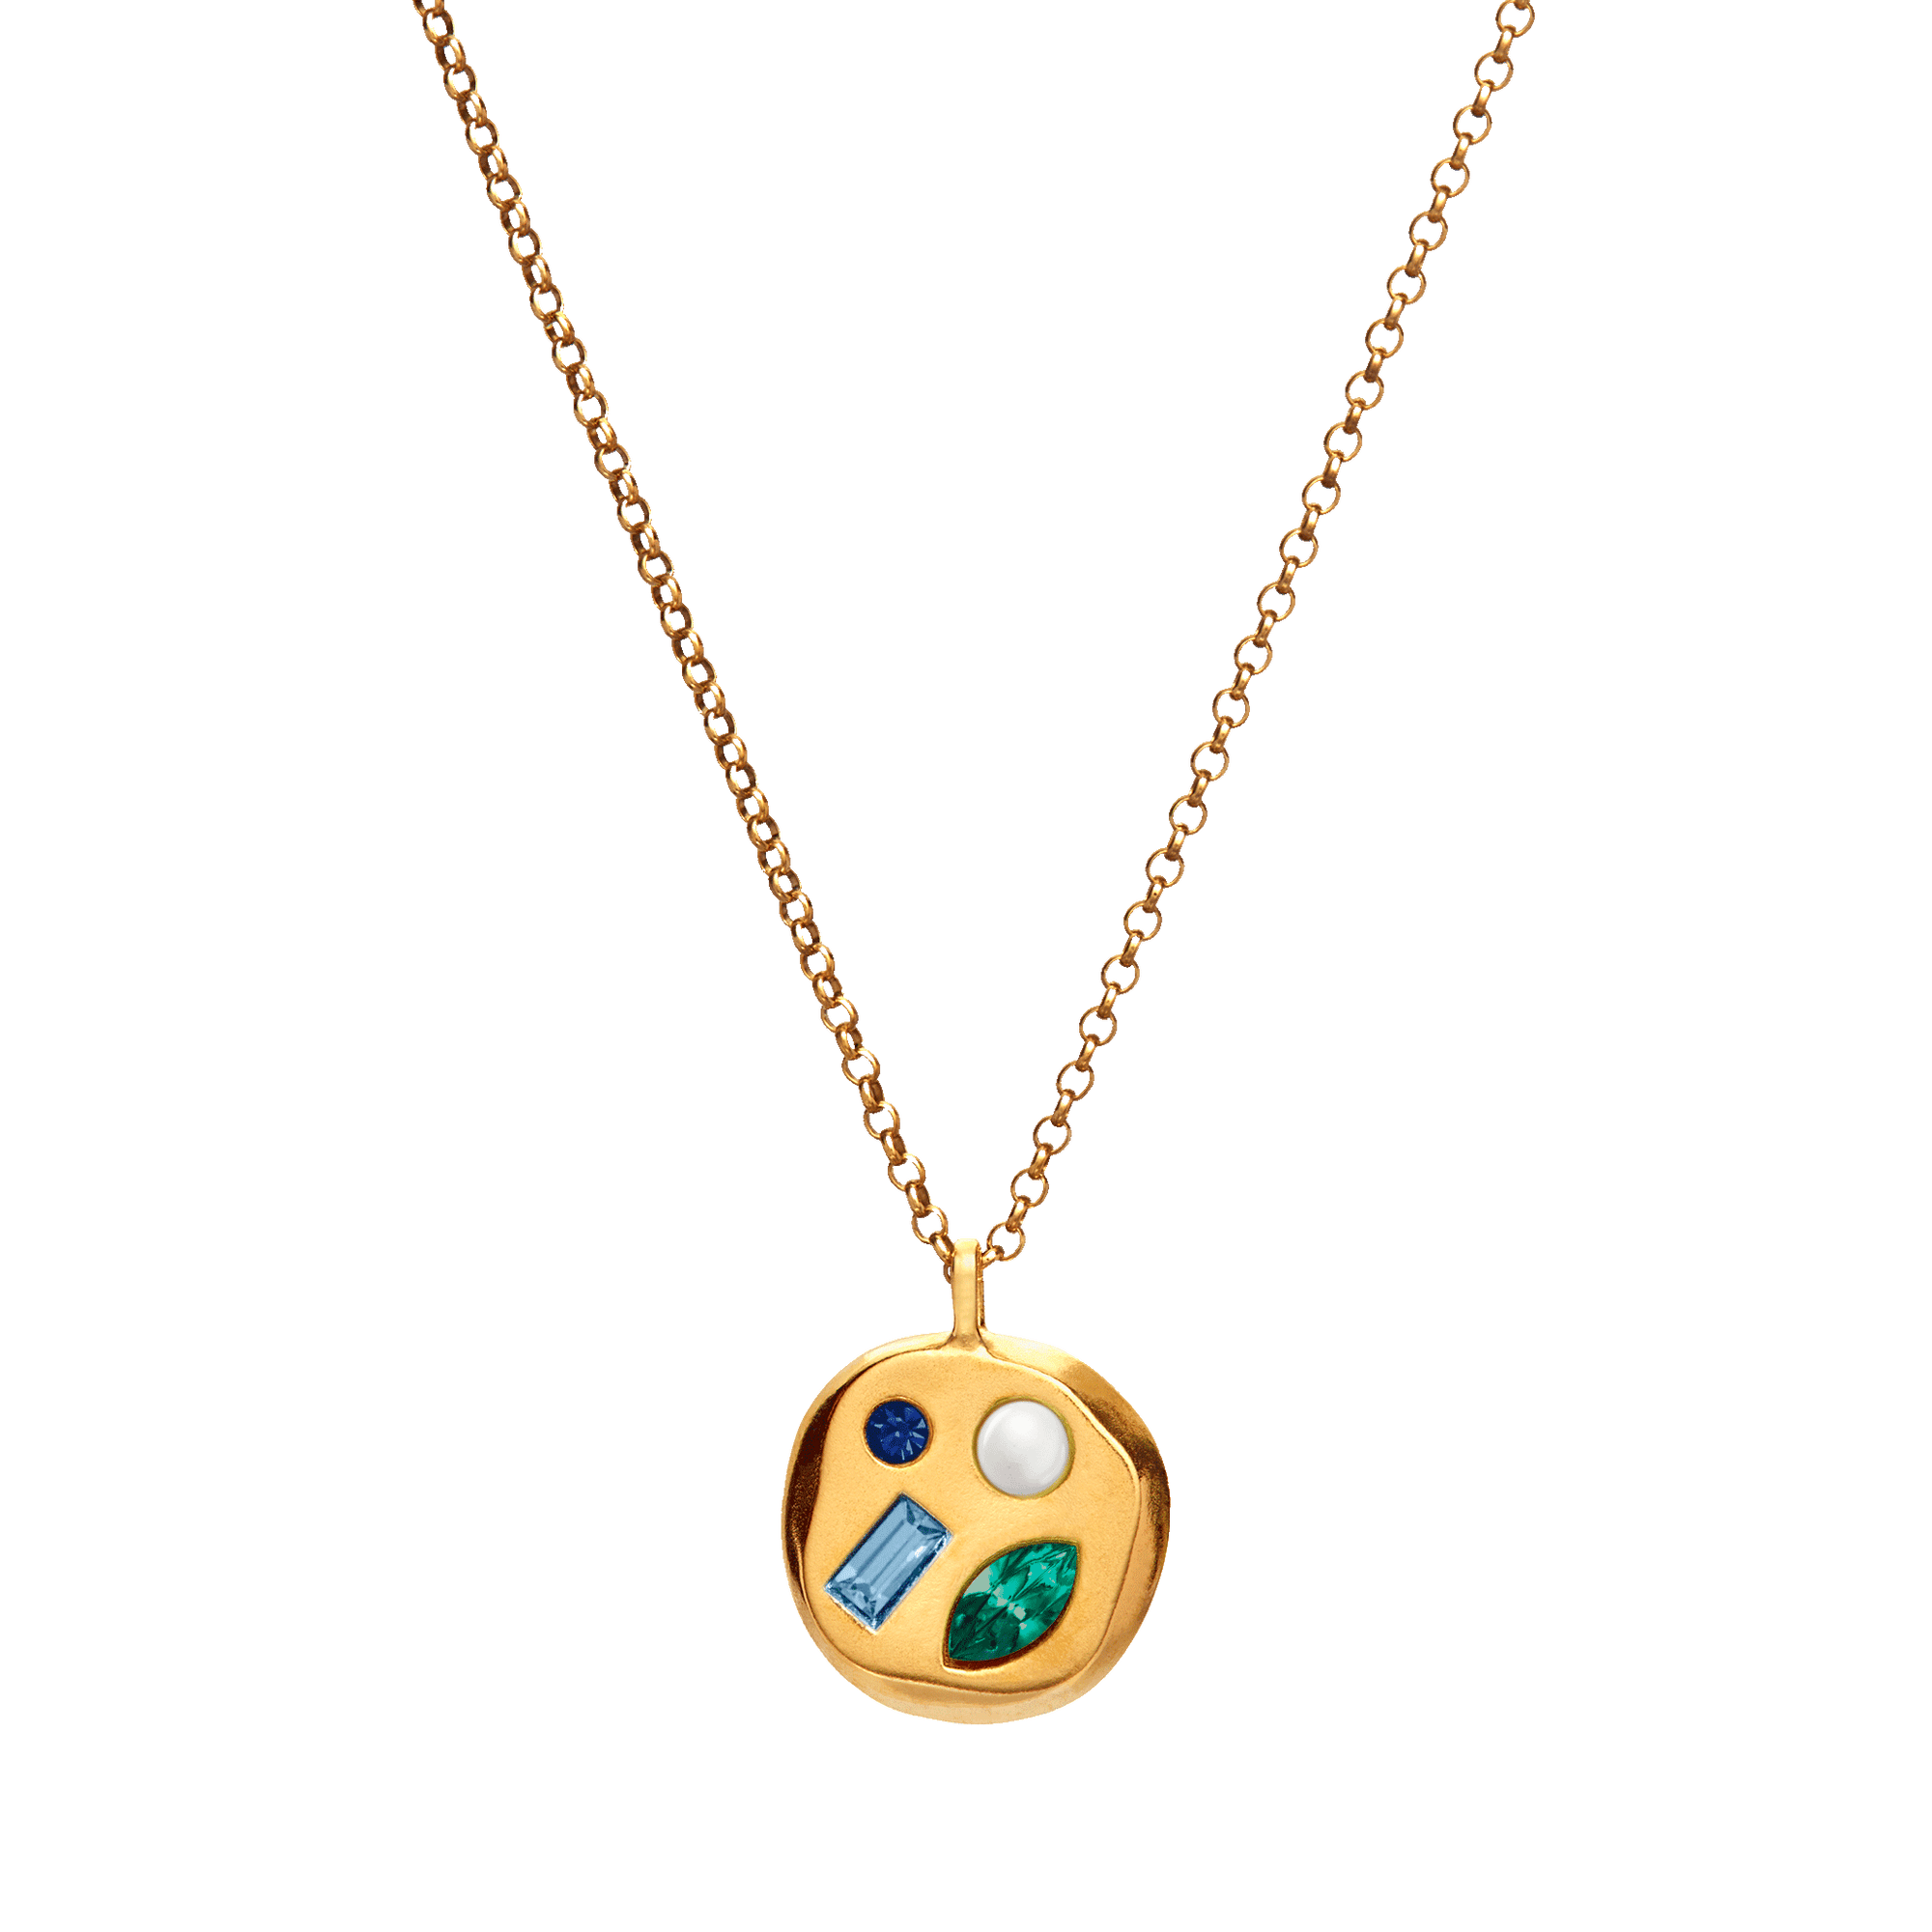 The May Seventh Pendant